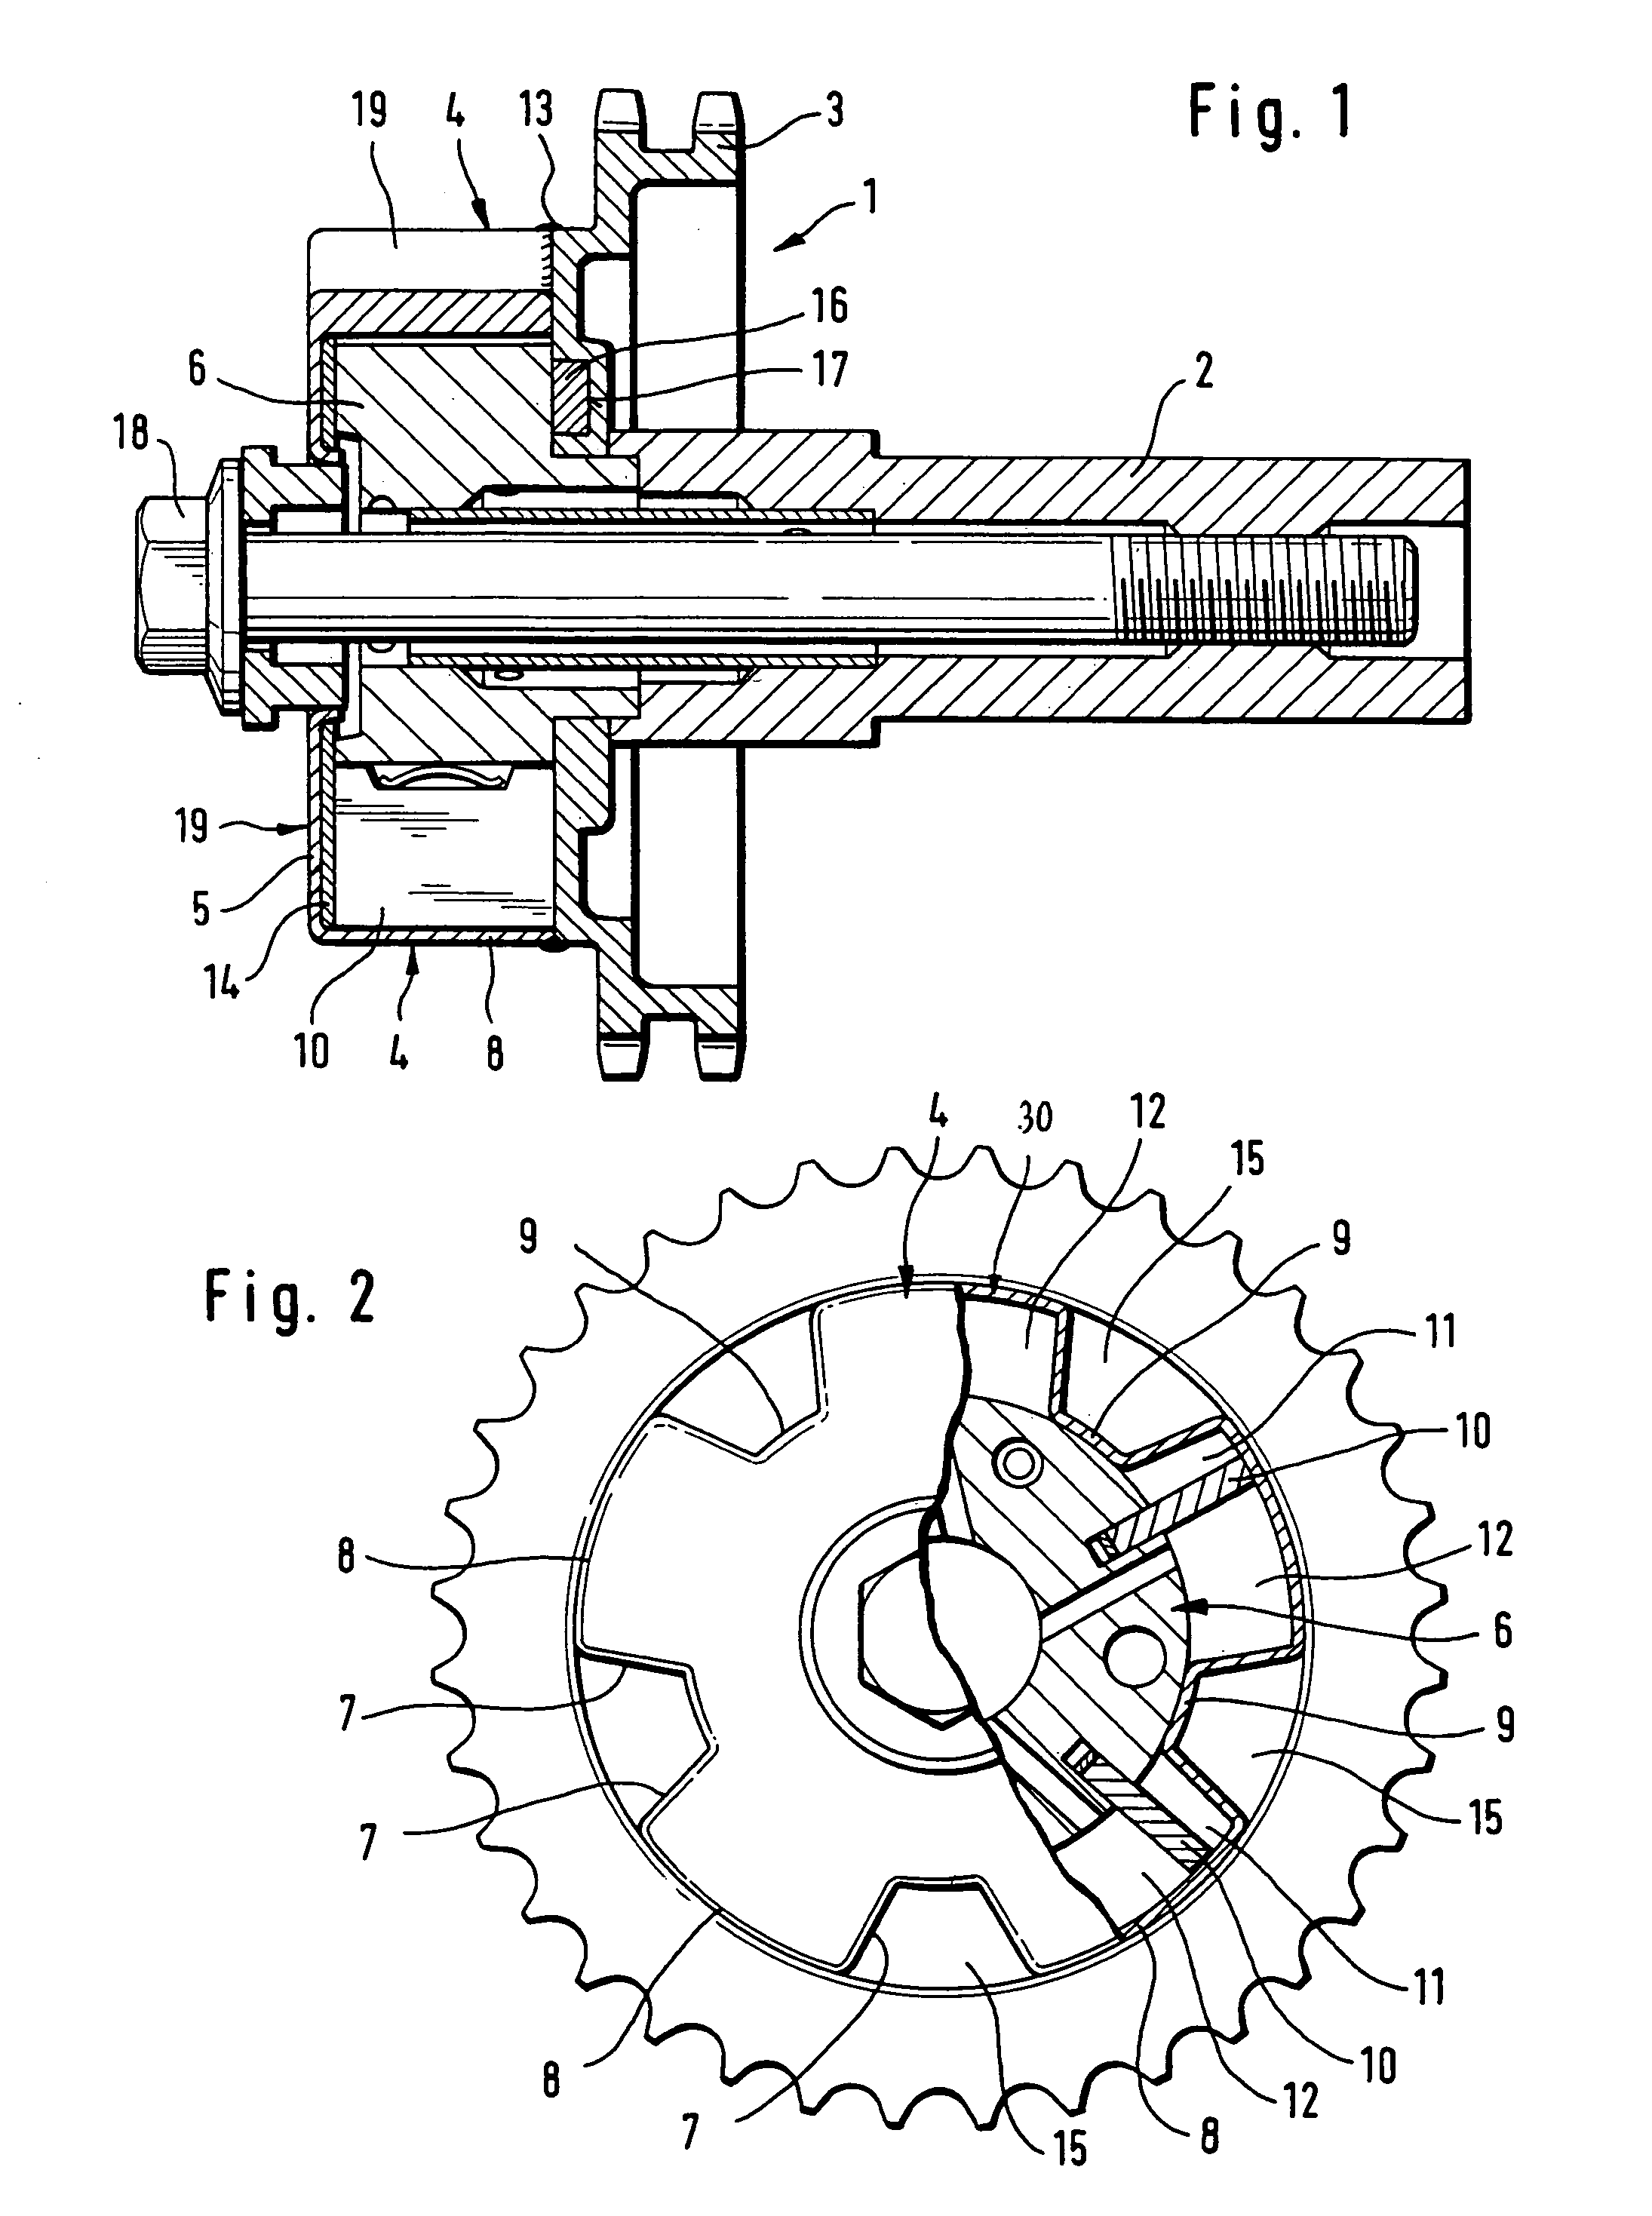 Internal combustion engine with hydraulic device for adjusting the rotation angle of a camshaft in relation to a crankshaft